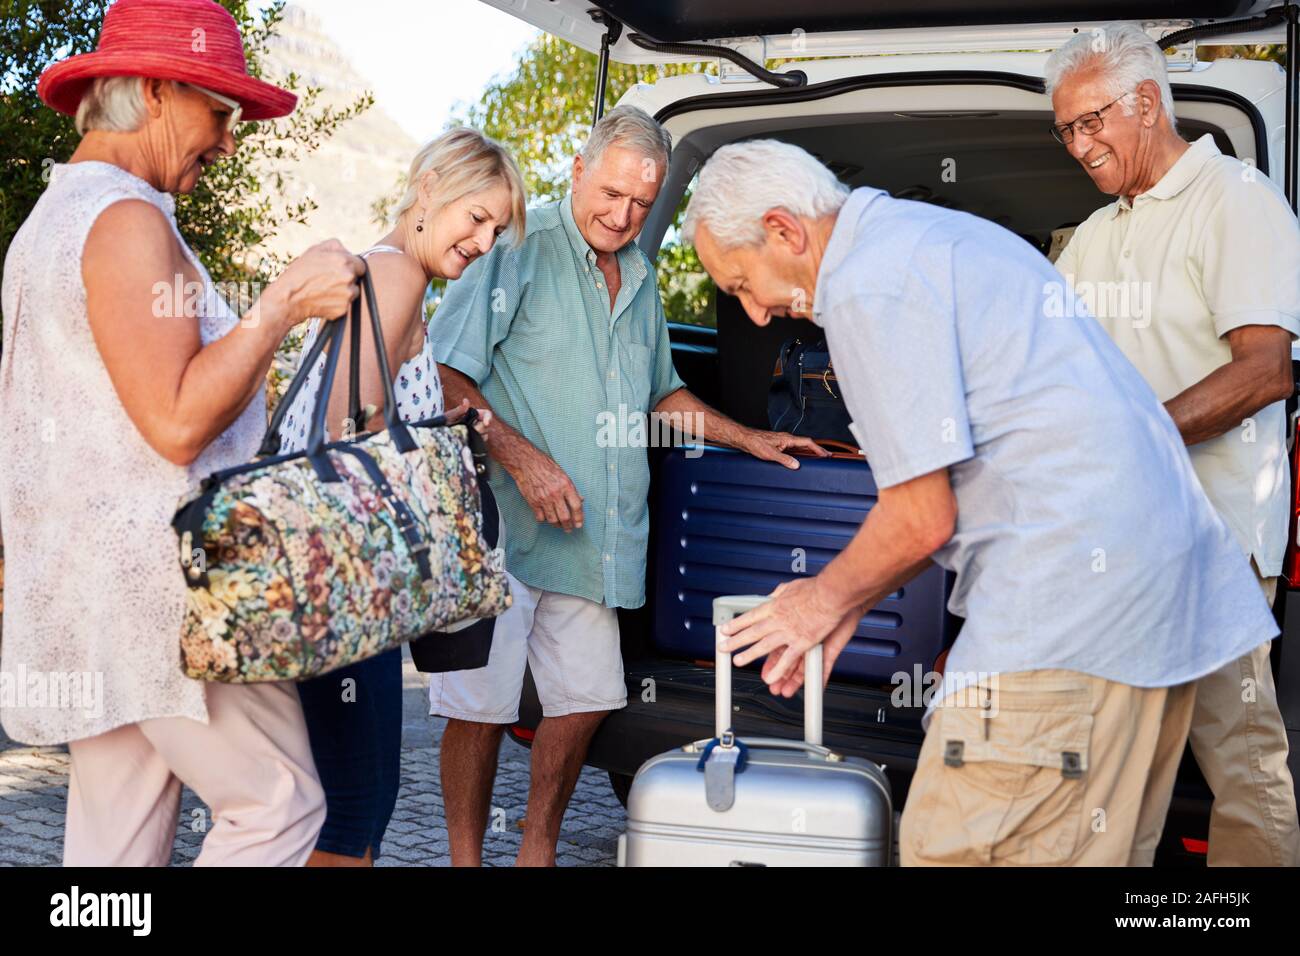 Group Of Senior Friends Loading Luggage Into Trunk Of Car About To Leave For Vacation Stock Photo